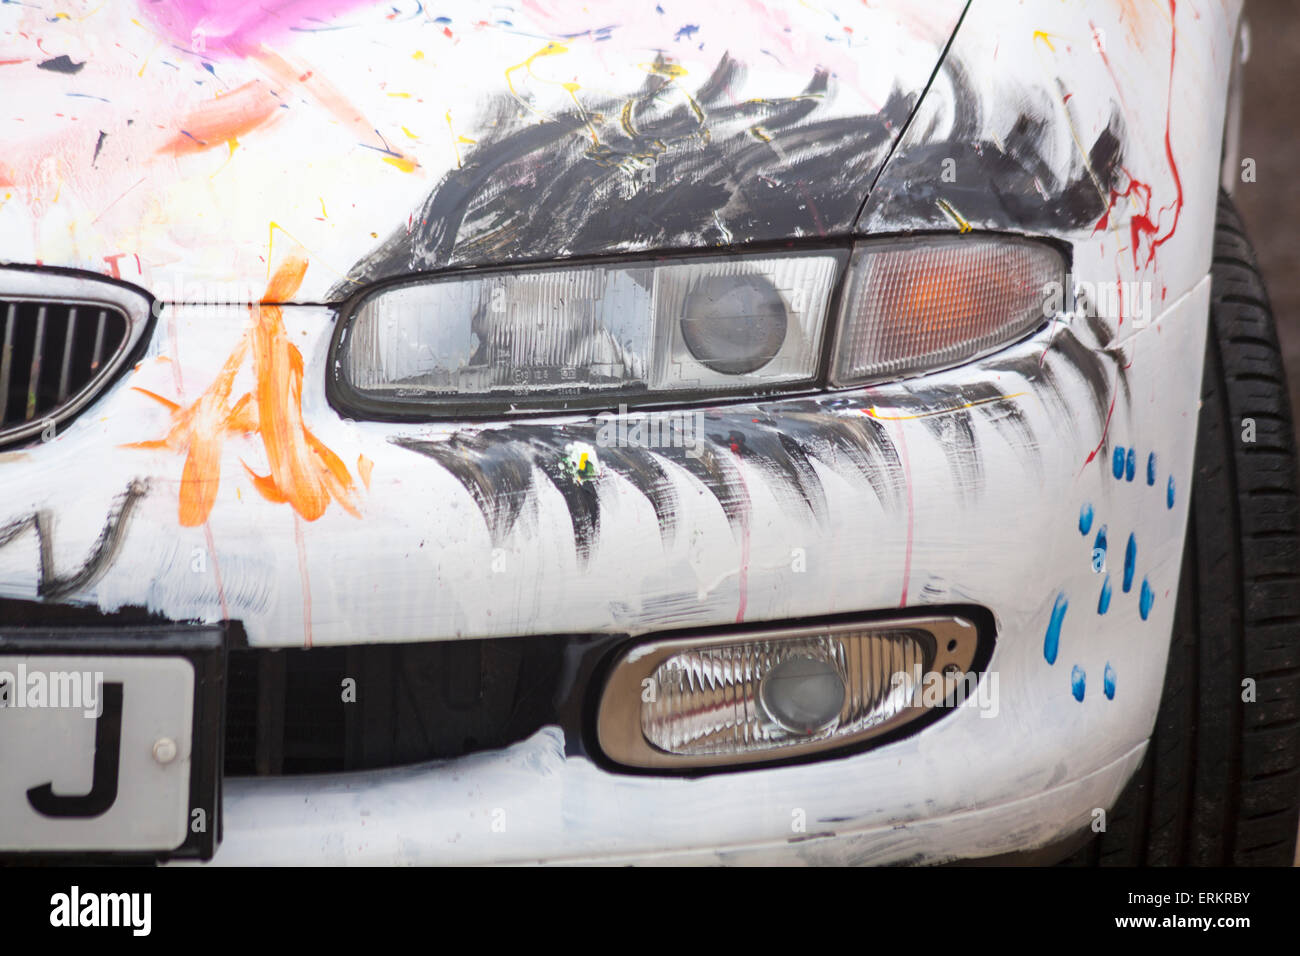 https://c8.alamy.com/comp/ERKRBY/eyelashes-painted-on-light-of-mazda-xedos-6-auto-car-to-make-it-look-ERKRBY.jpg